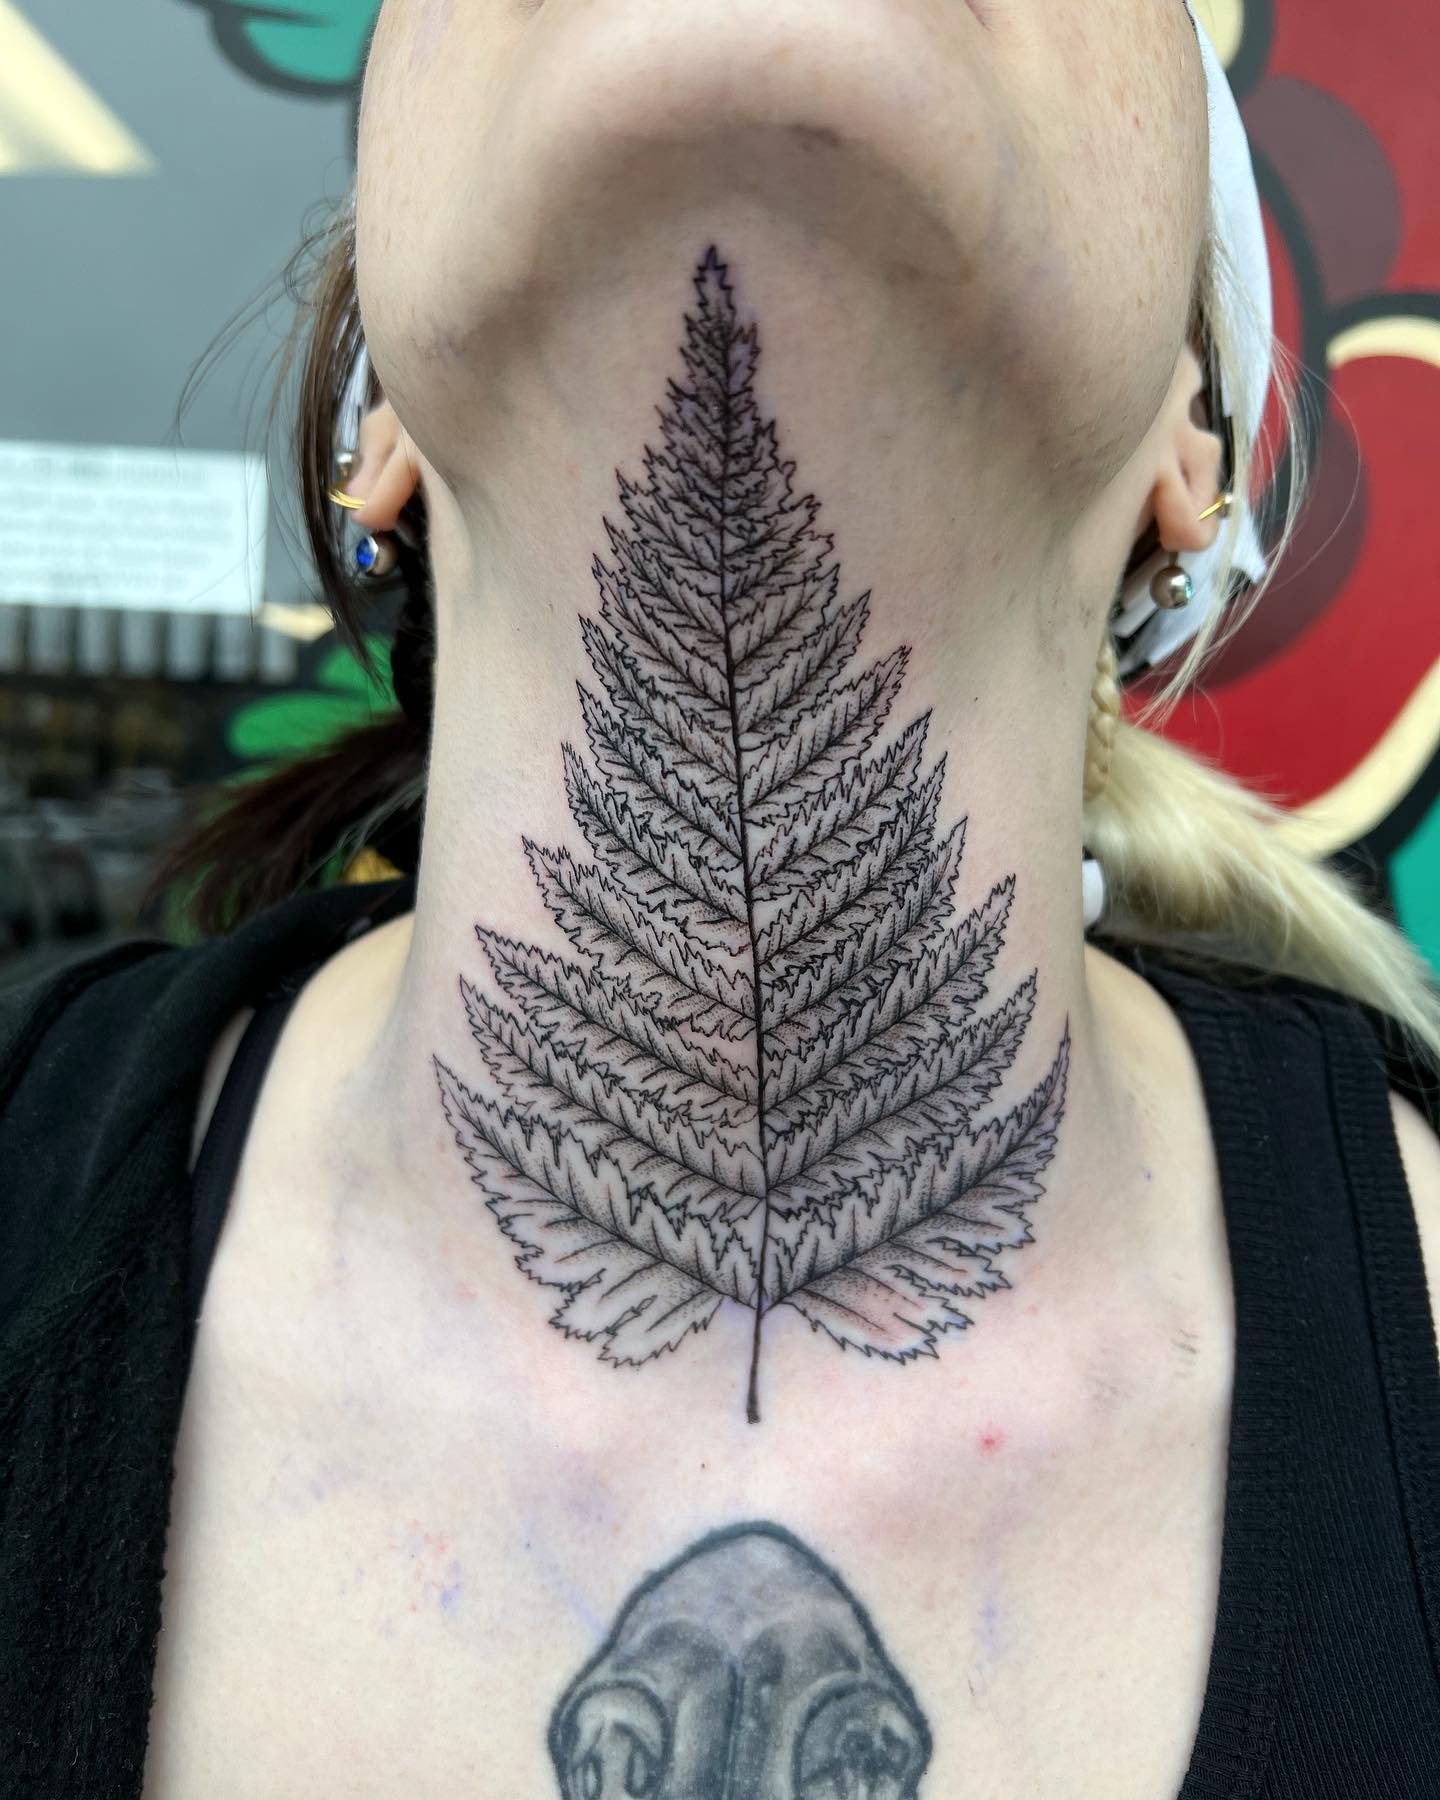 Here is a nice throat pine tattoo that is composed of dotworks and details. The pine is highly associated with North America, and in North America, it symbolizes wisdom and longevity. Give a chance to this iconic design.